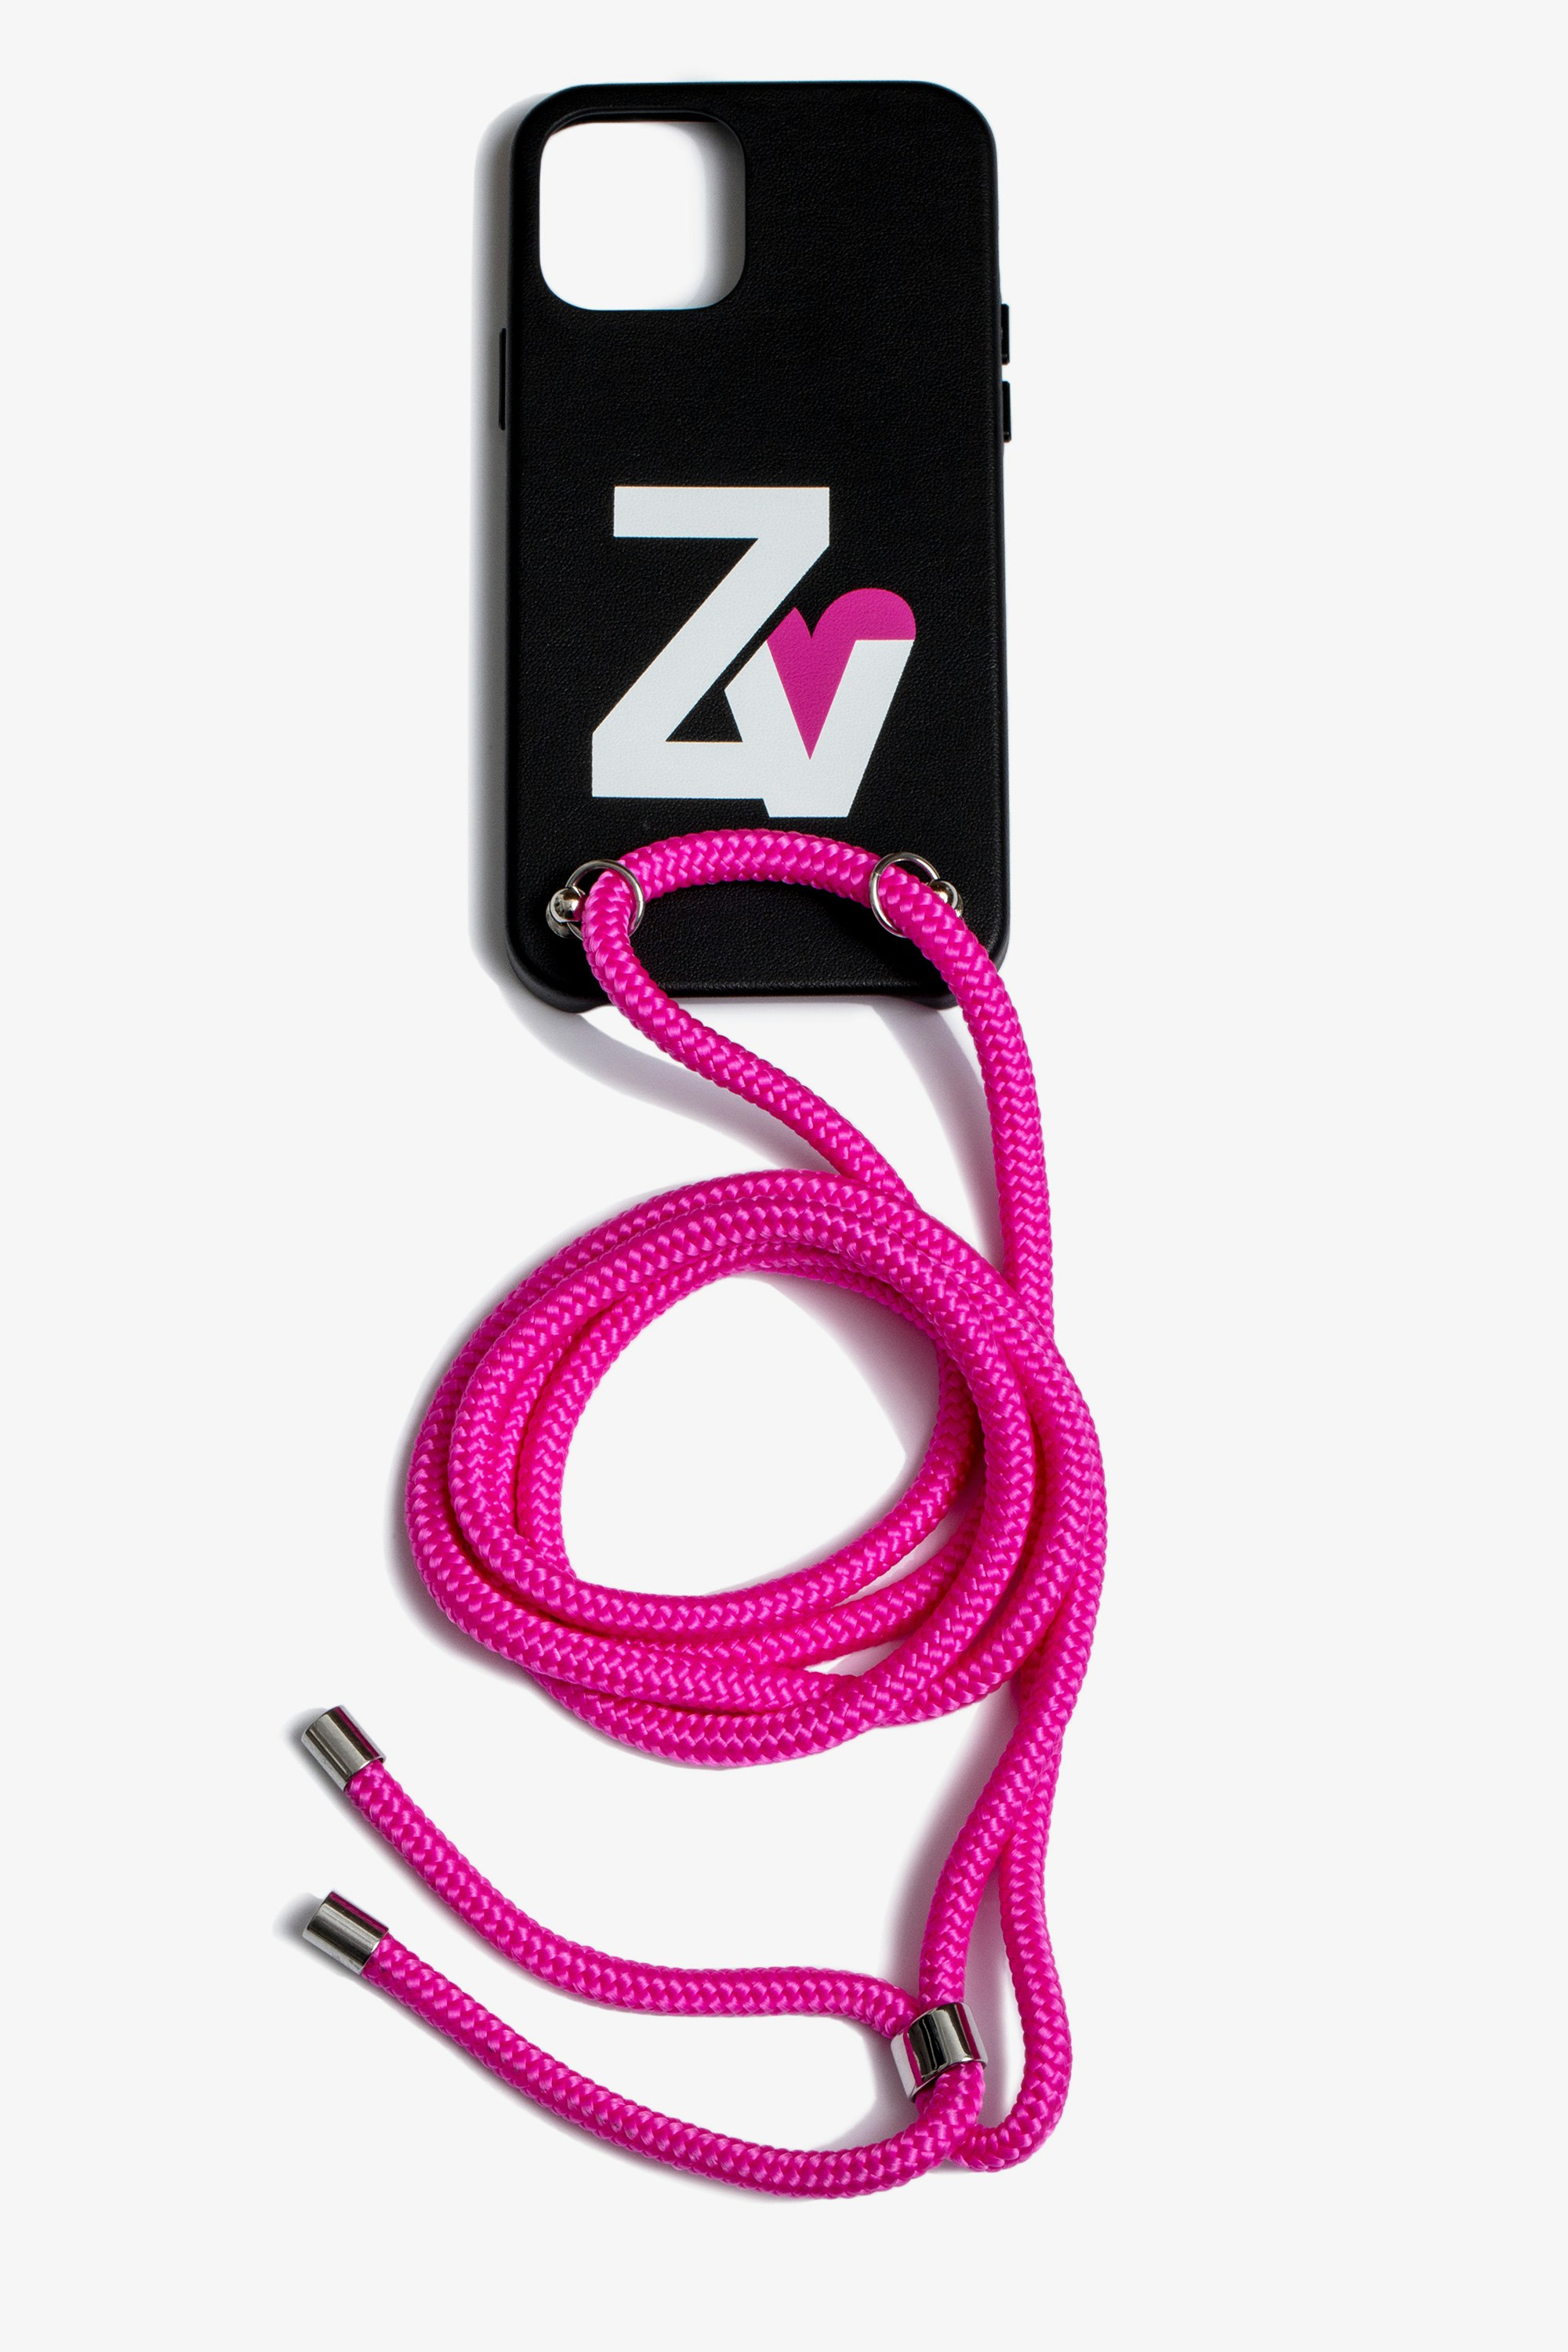 ZV Crush Rope iPhone 12 ケース Women’s iPhone 12 cover with ZV Crush logo on the back and a cord to wear around your neck